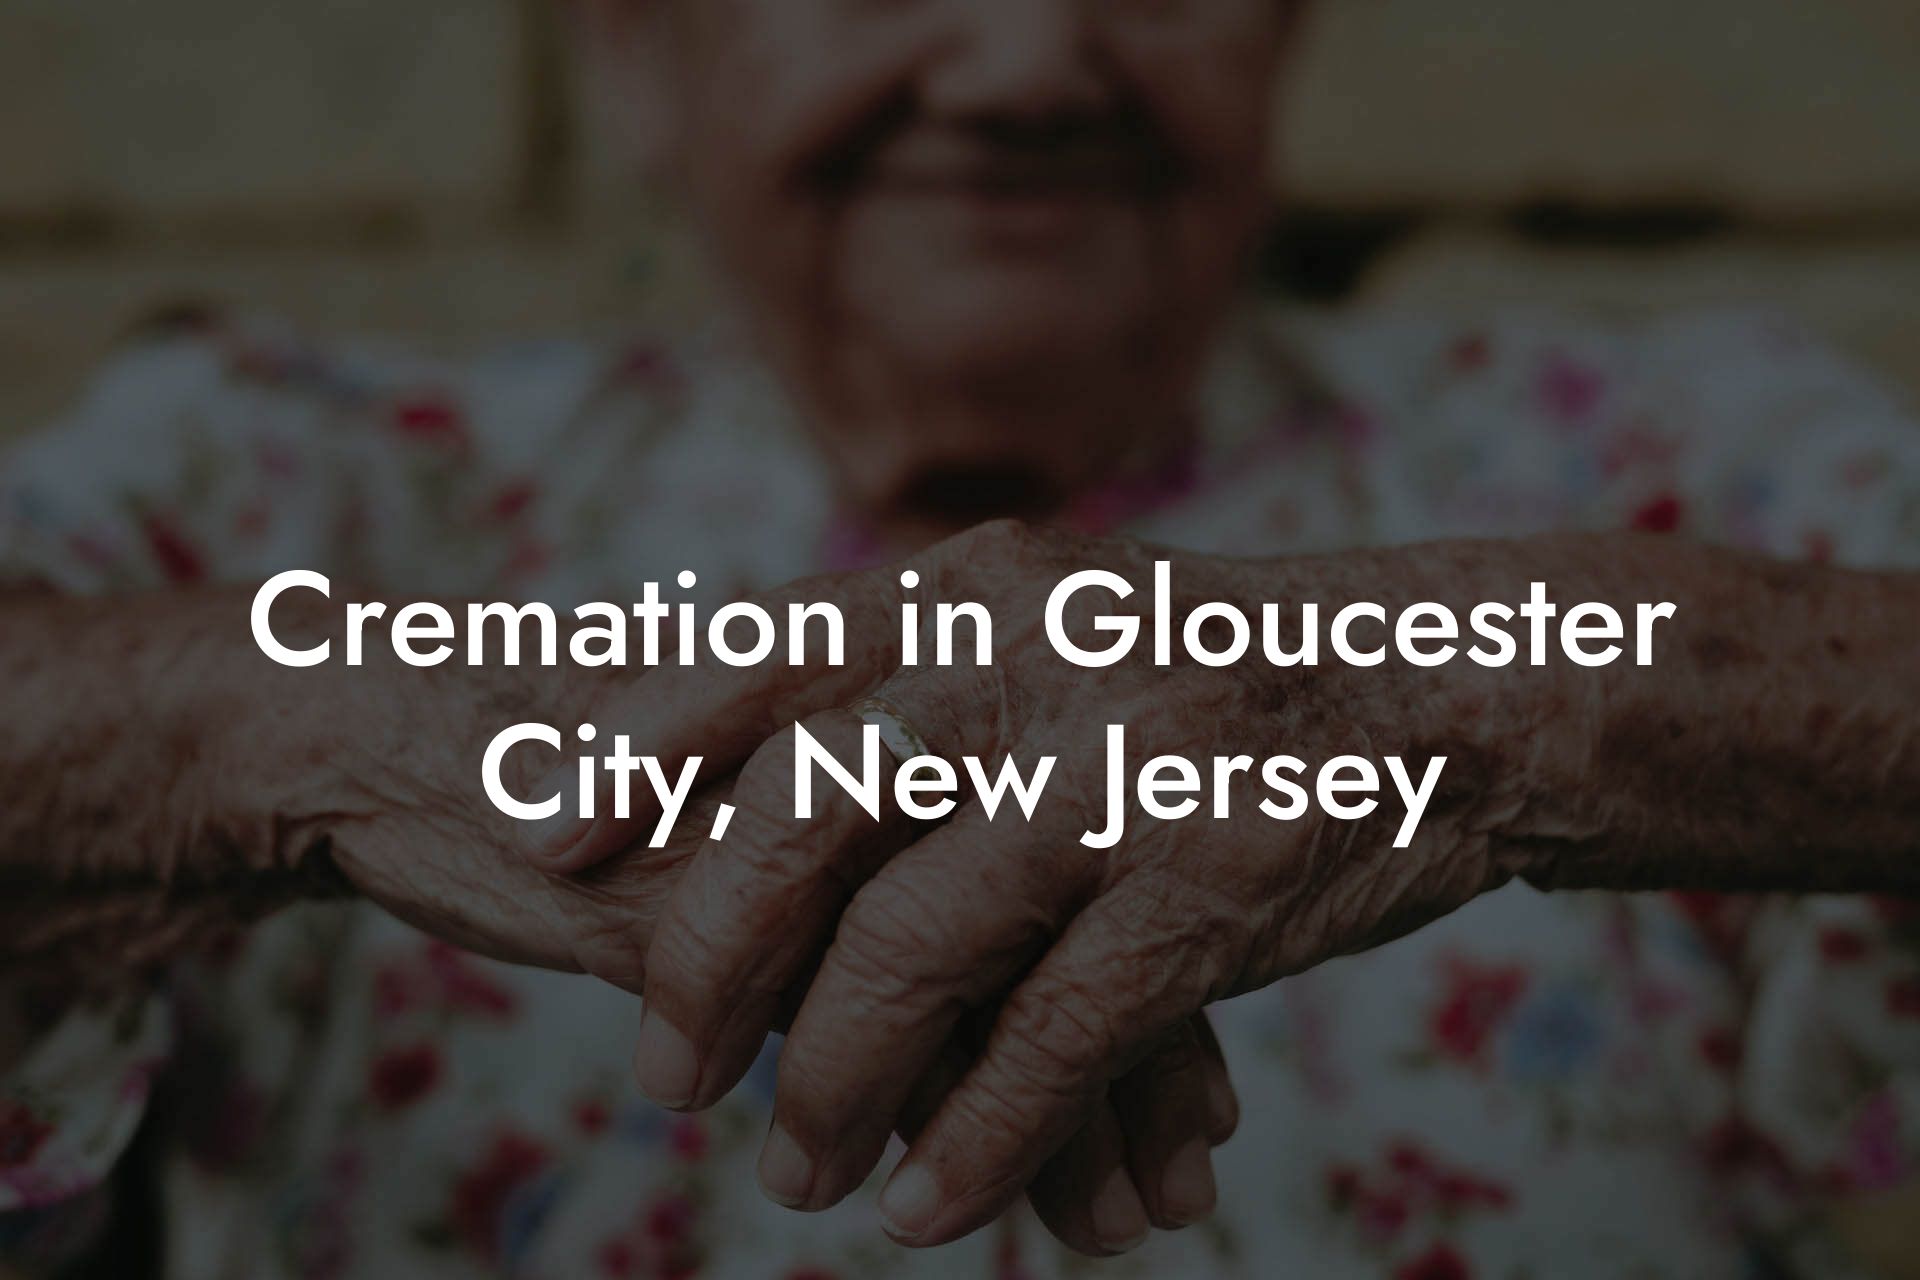 Cremation in Gloucester City, New Jersey